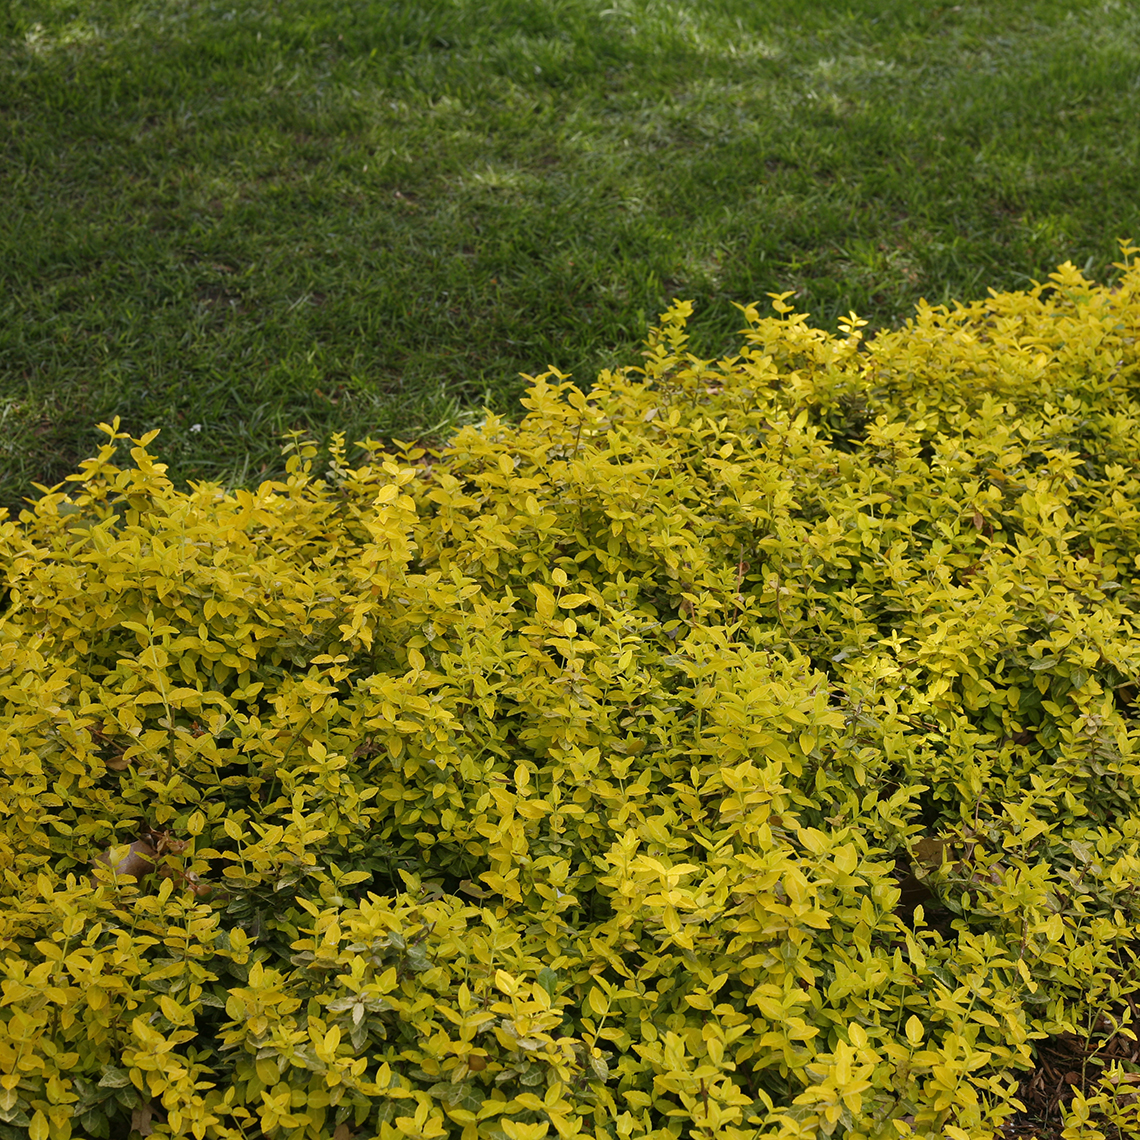 Goldy Euonymus in the landscape next to grass